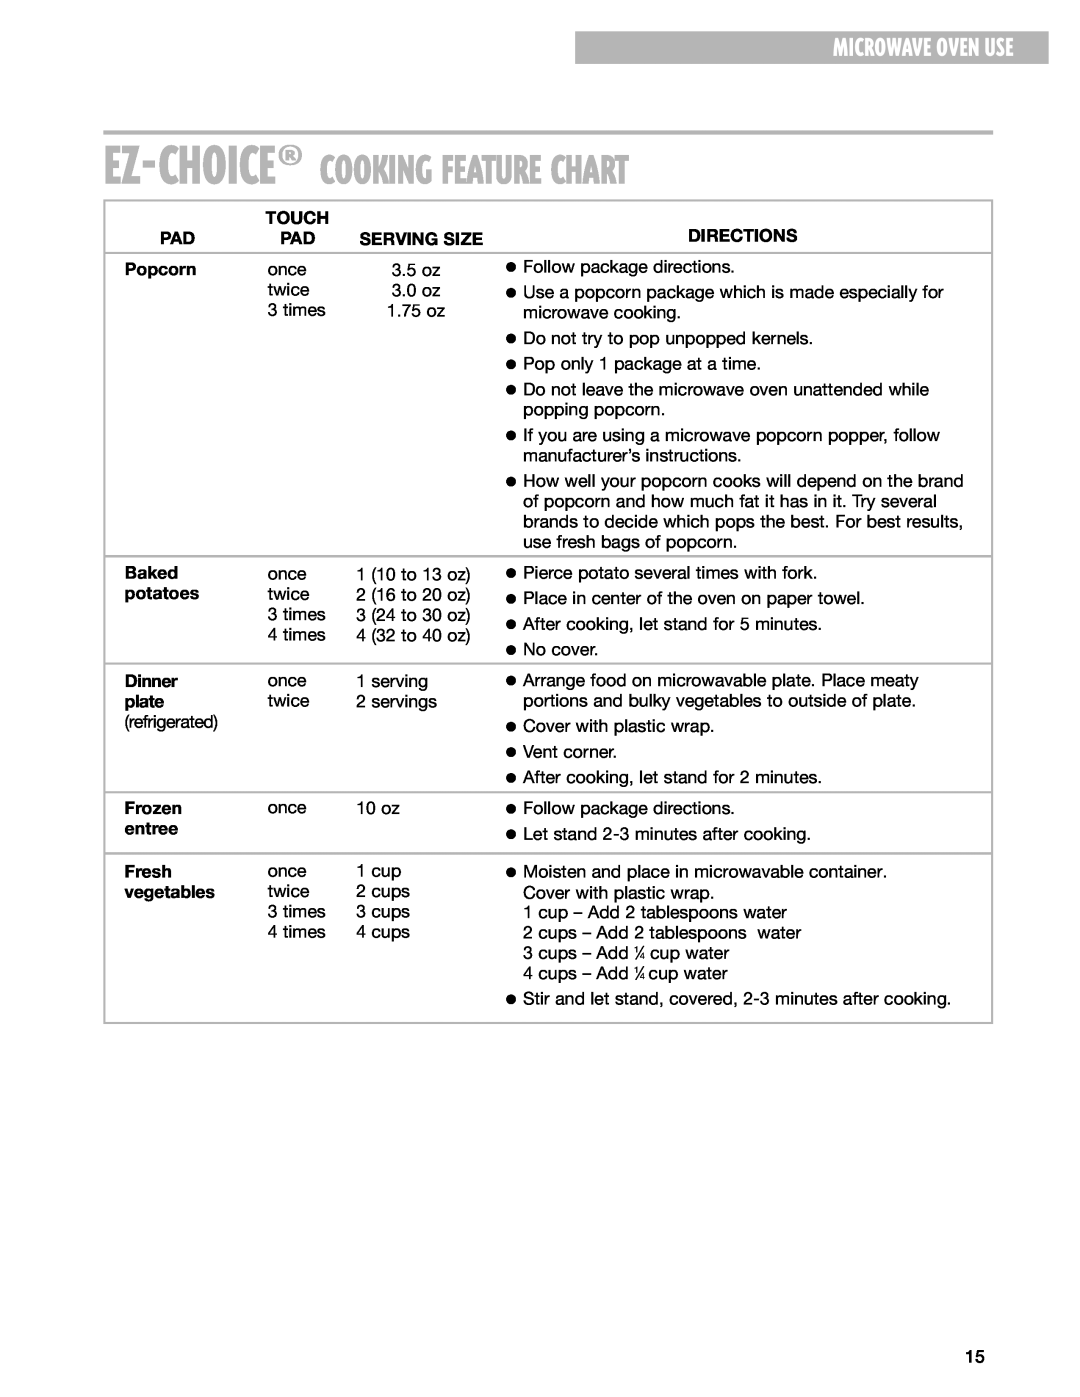 Whirlpool MT4078SK, MT4070SK installation instructions Ez-Choice¨Cookingfeature Chart, Microwave Oven Use 